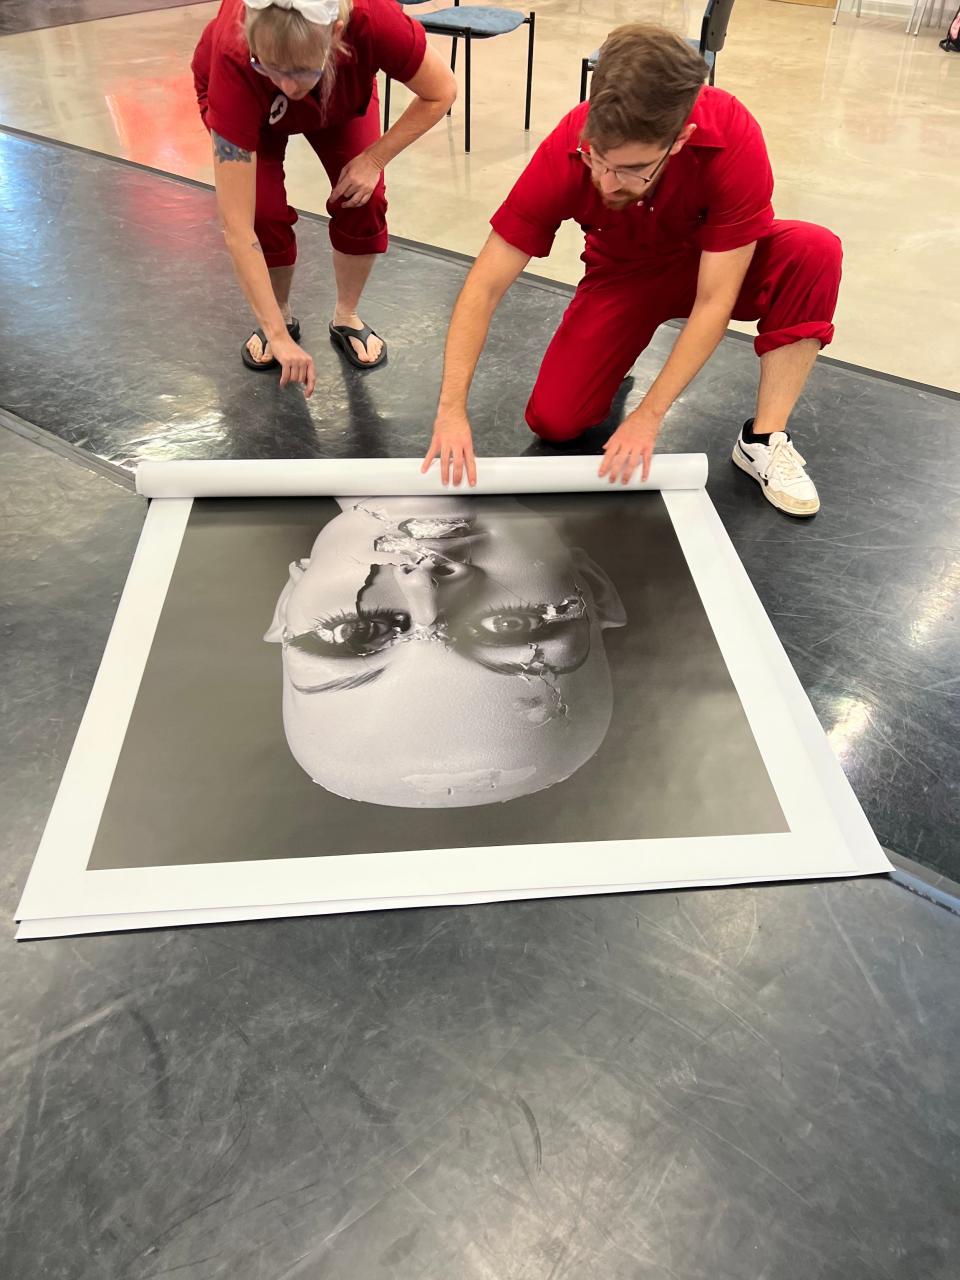 SPARK! Creative Lab artists Kiona Millirons, left, and Pedro Perez unroll the photo “Smashed” by Edmond photographer Neil Chapman in preparation for the artist collective's upcoming project "Ditty Bops: The Art of Listening." The project tells Chapman's life story, including his military service in the Vietnam War and his diagnosis with Parkinson’s disease due to his wartime exposure to Agent Orange.